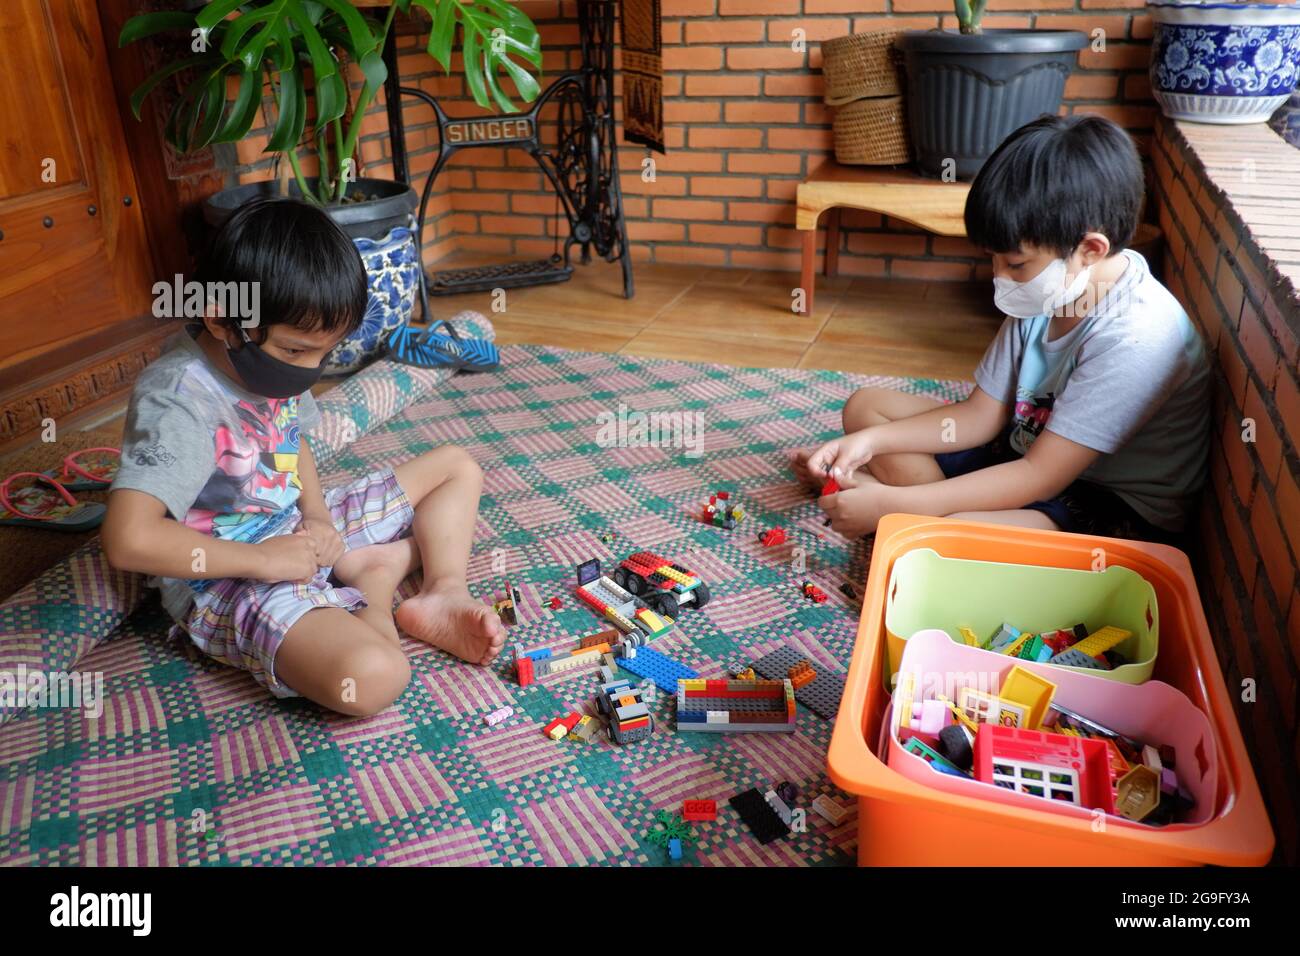 Two boys with facemask play lego toys together in their house. Stock Photo